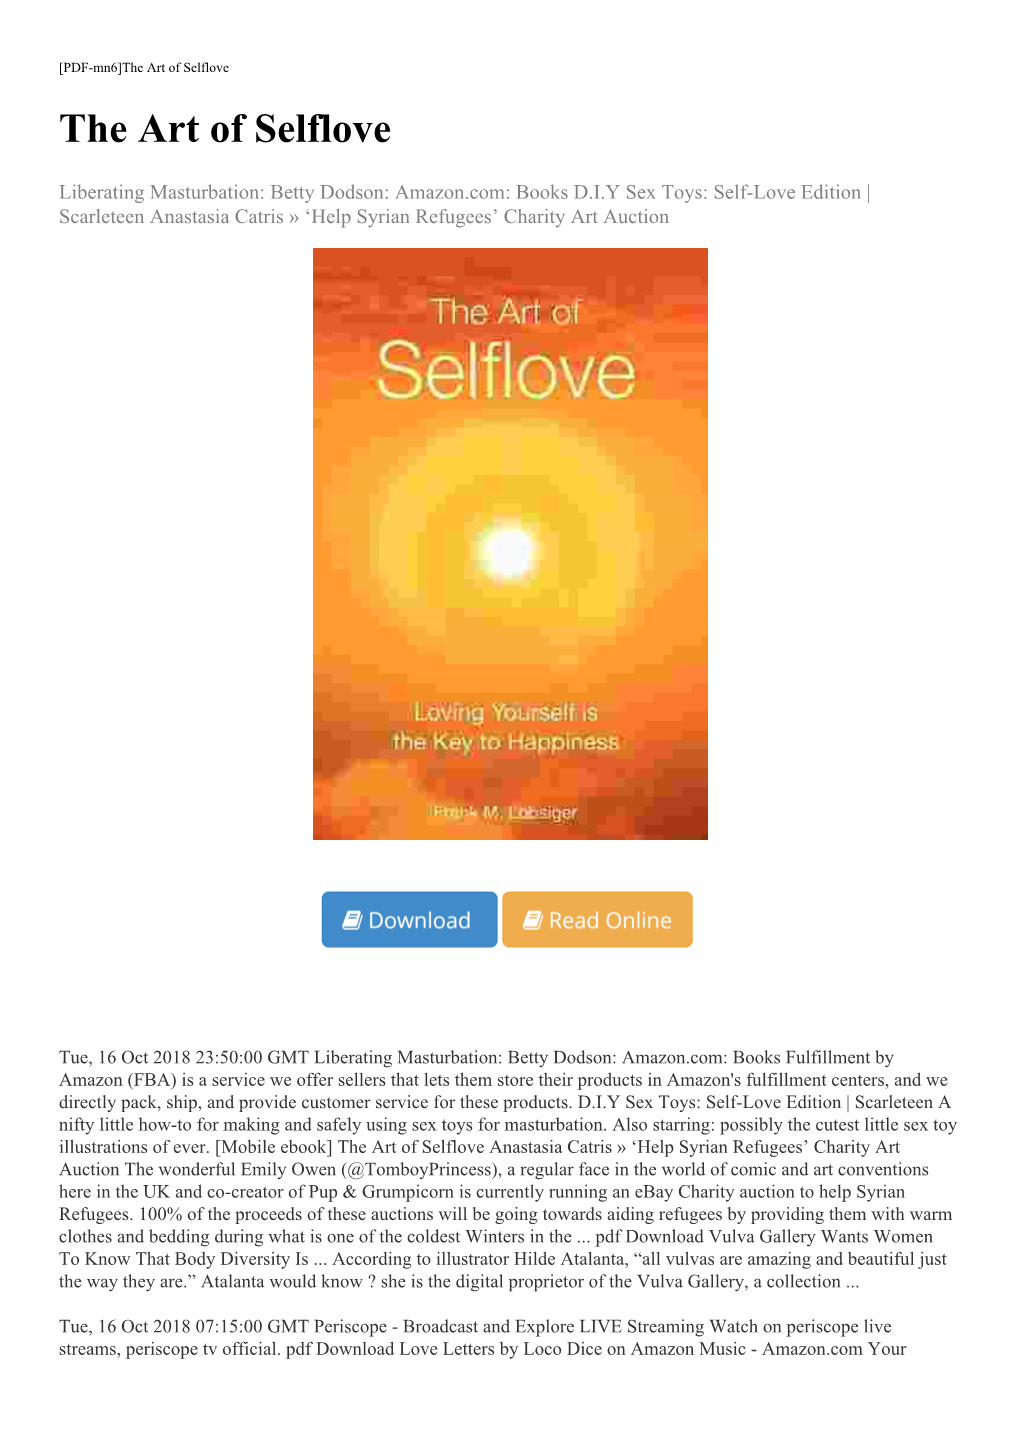 [Mobile Ebook] the Art of Selflove